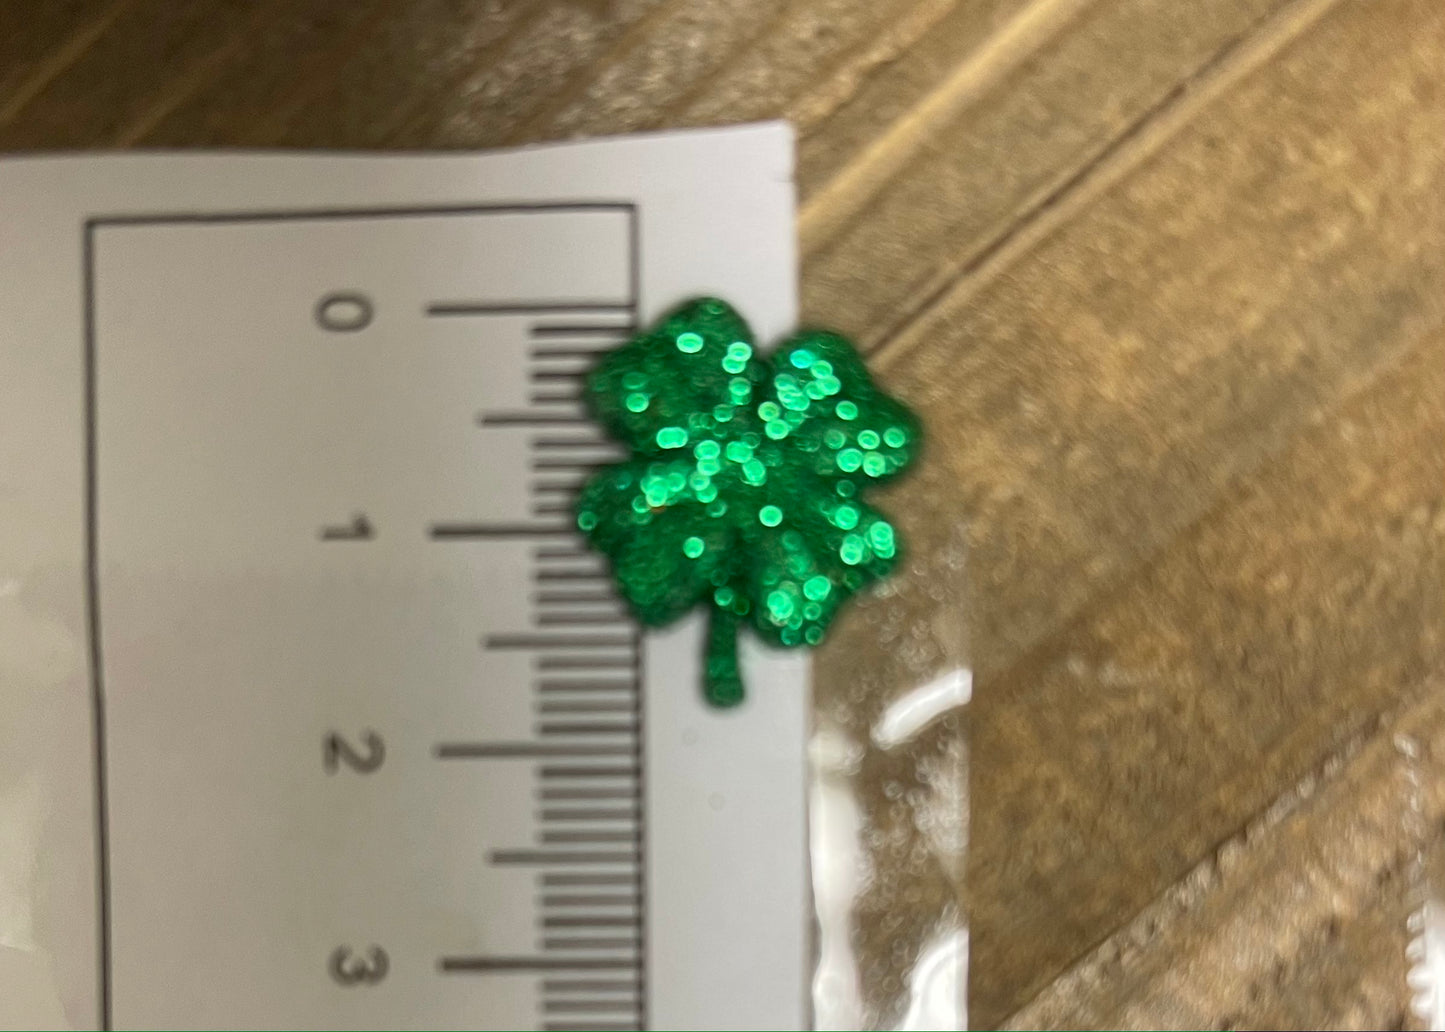 Green Sparkly Glitter Shamrock Post EarringsPink tiful of LOVE